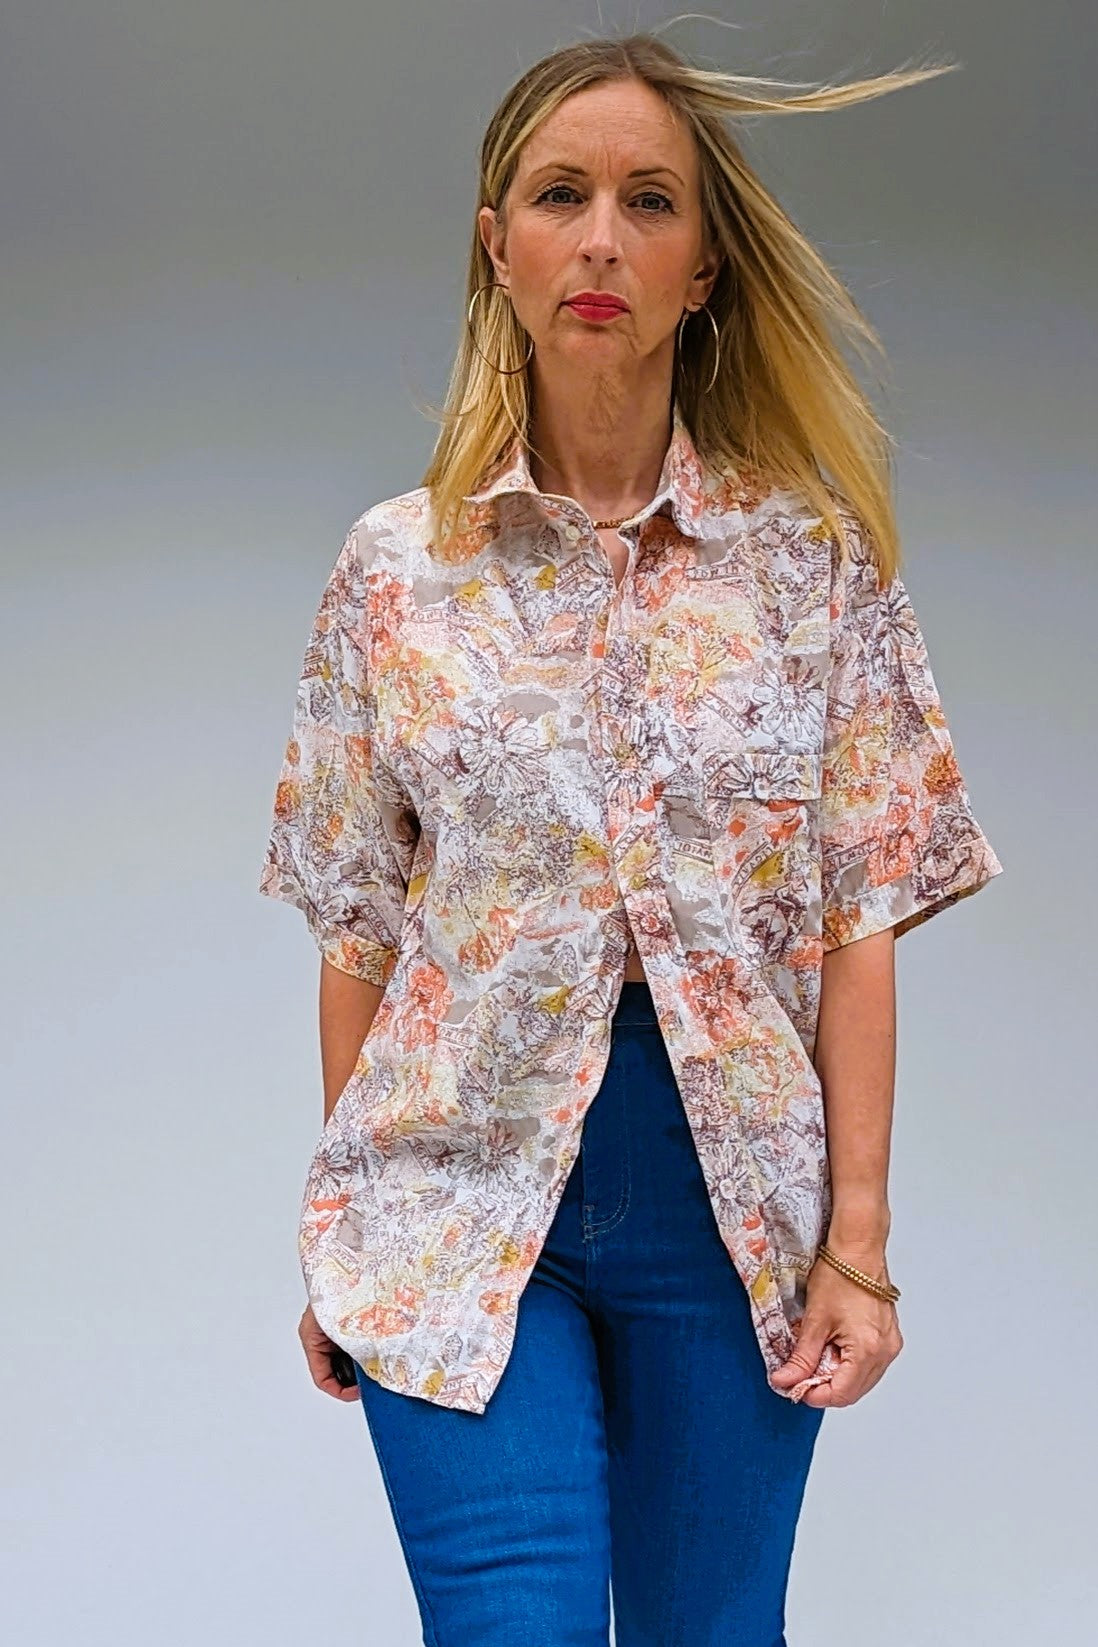 Peach, beige and grey patterned short sleeve blouse